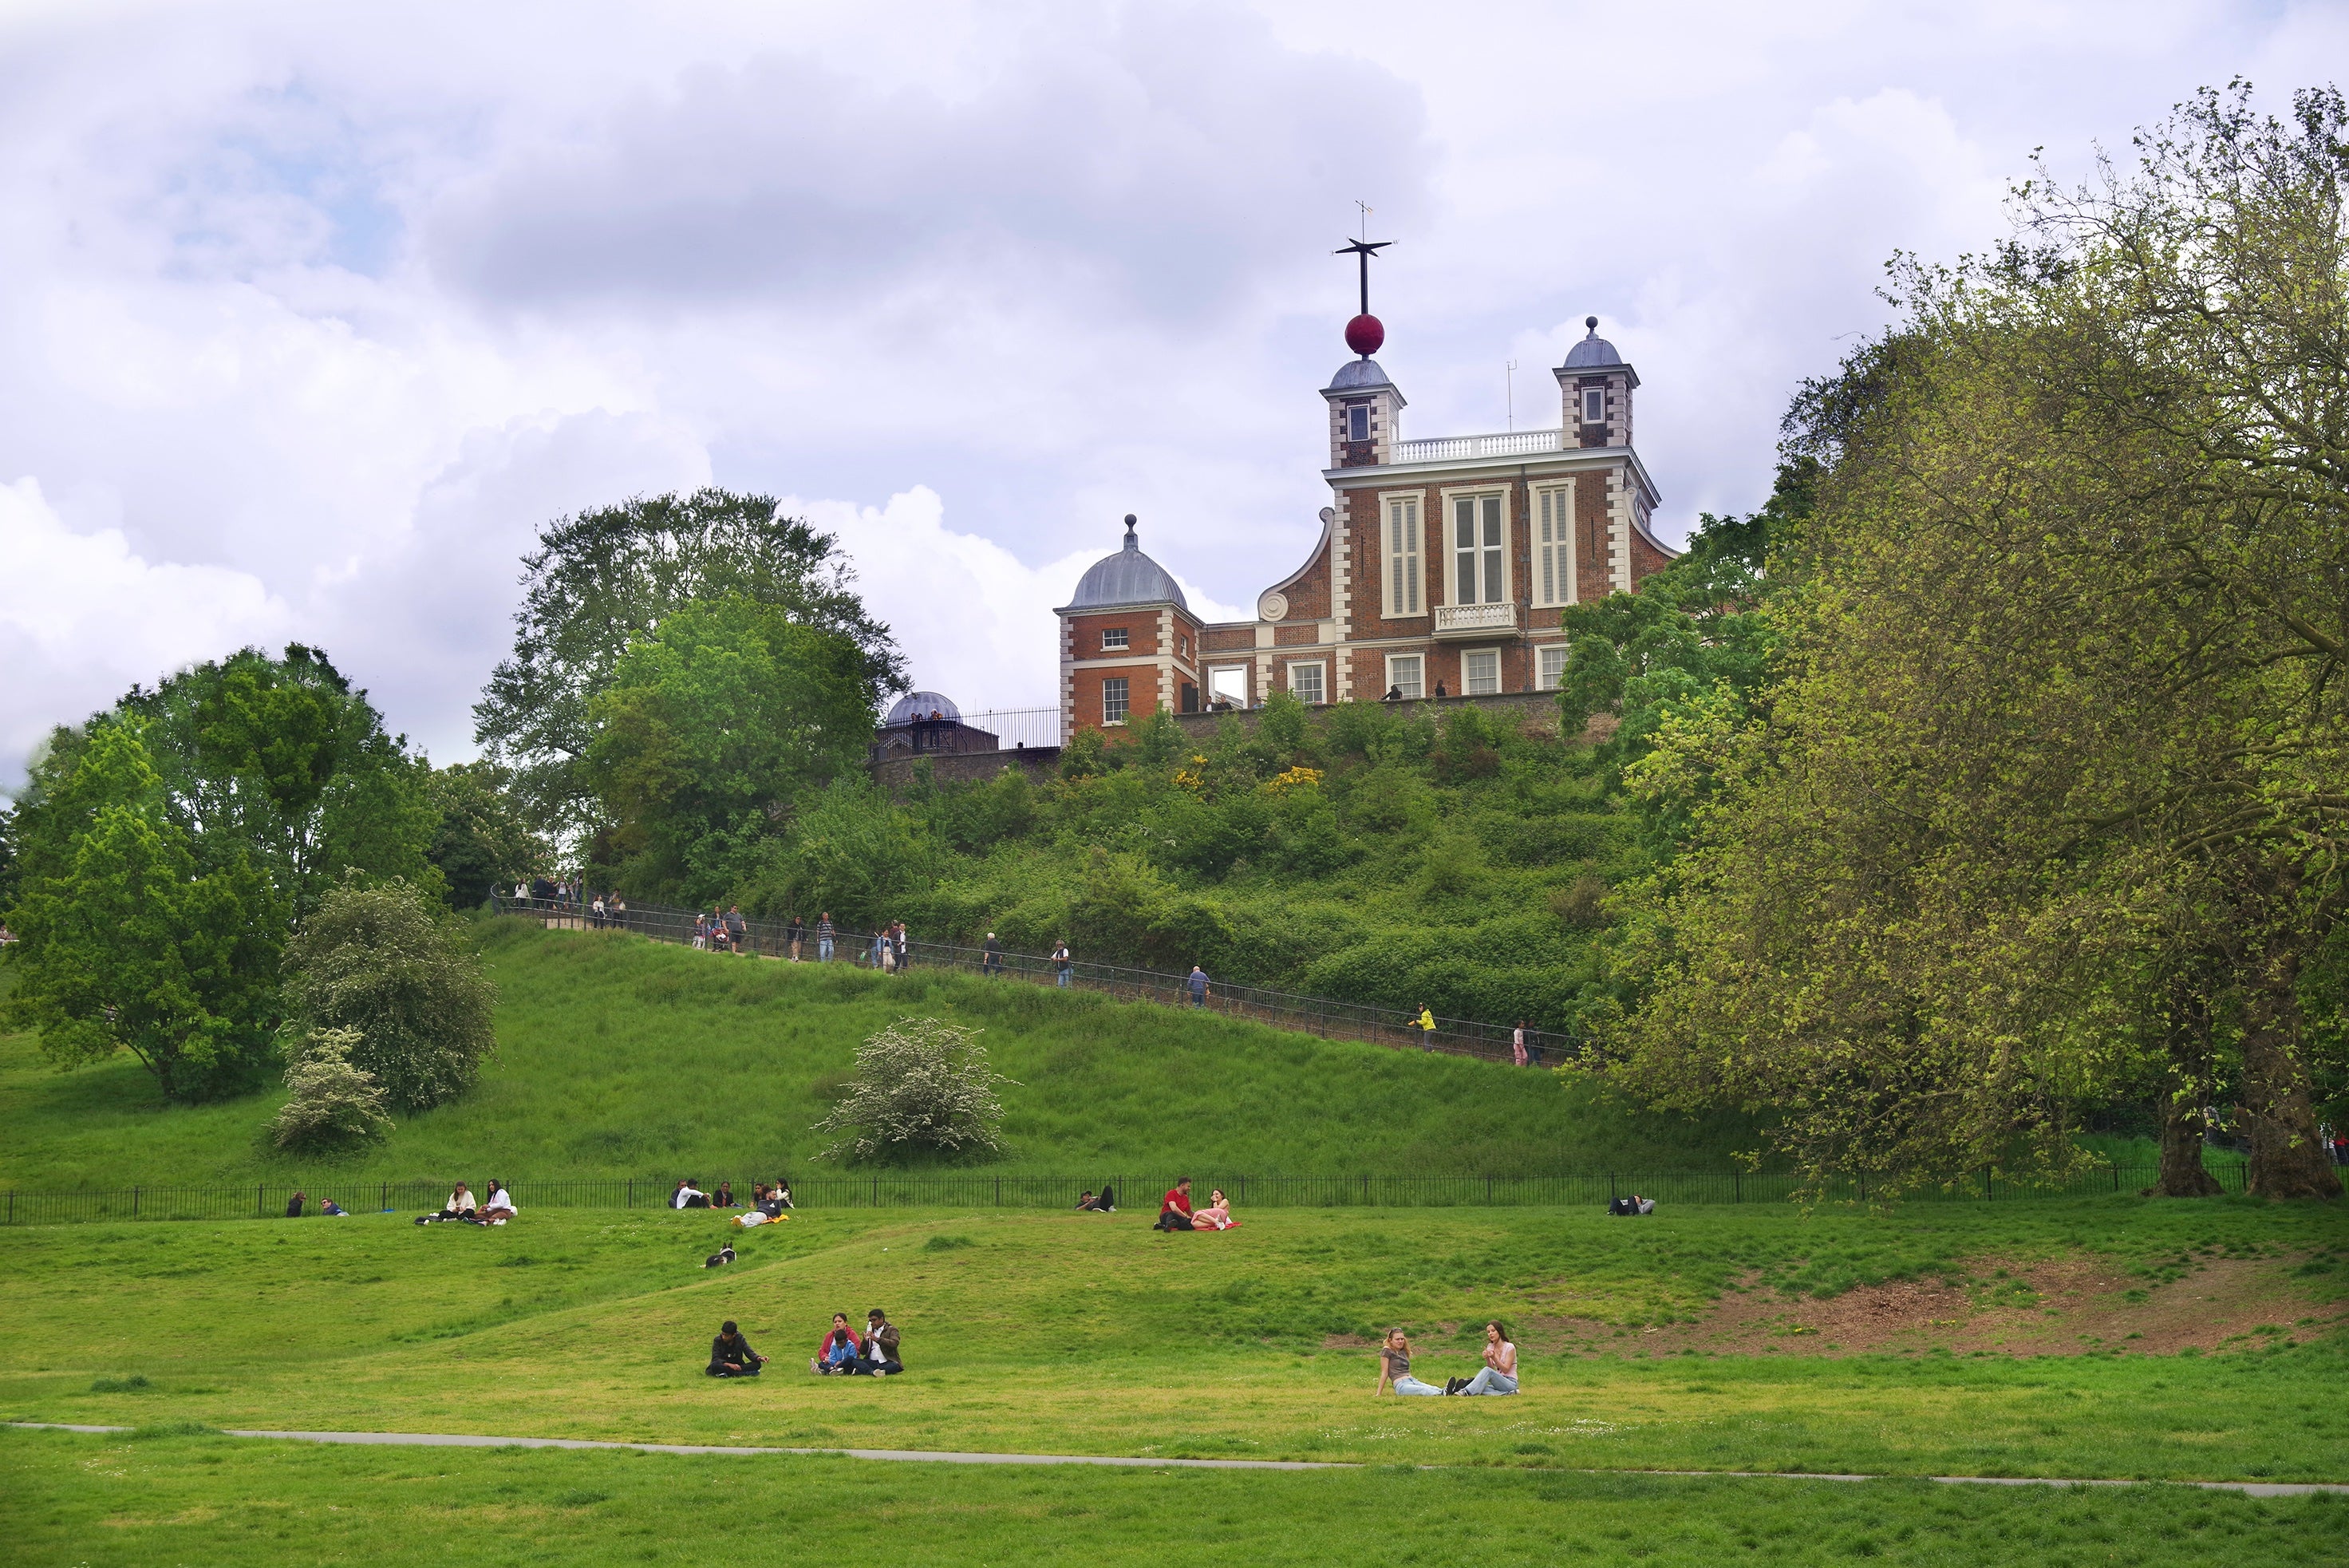 The Royal Observatory Greenwich sits on a hill overlooking Greenwich Park. The red brick building is Flamsteed House, which dates from 1676. 